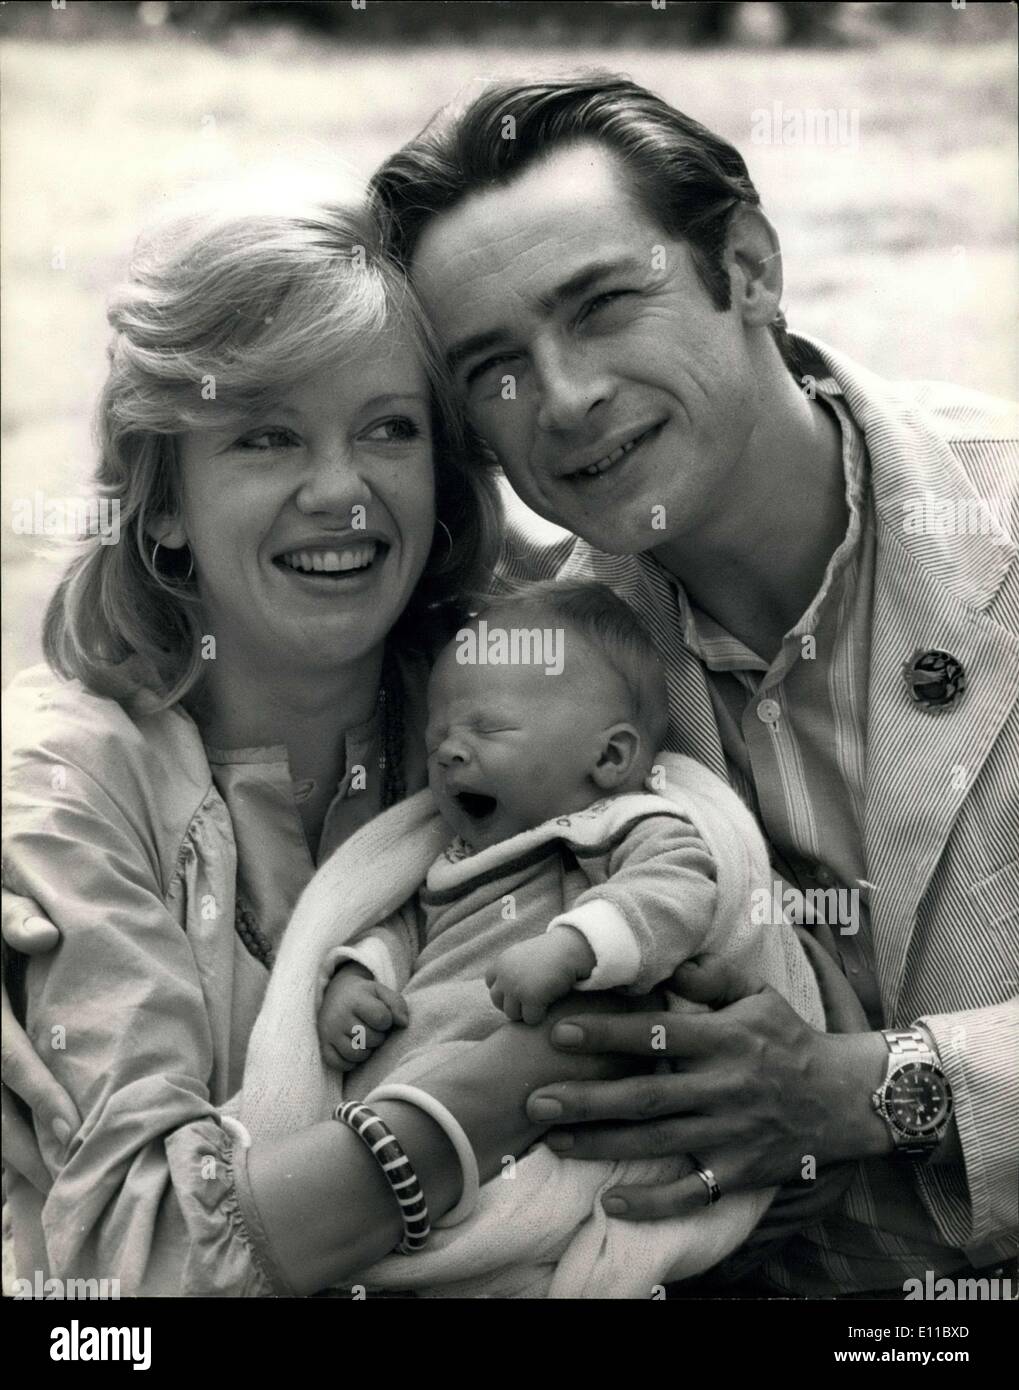 Aug. 11, 1976 - Actress Hayley Mills Introduces Her New Baby: Actress Hayley Mills, 30, who gave birth to an 8 lb. 13 oz baby boy on July 30th at the St. Theresa nursing home, Wimbledon, introduced her child to the press today. The baby's father, actor Leigh Lawson, 32, flew back from Munich to be present at the birth, but arrived after it was all over. The baby is to be named Jason. Actress Hayldy is still married to film producer, Roy Boulting, but has a changed her name to Lawson by deed poll Stock Photo